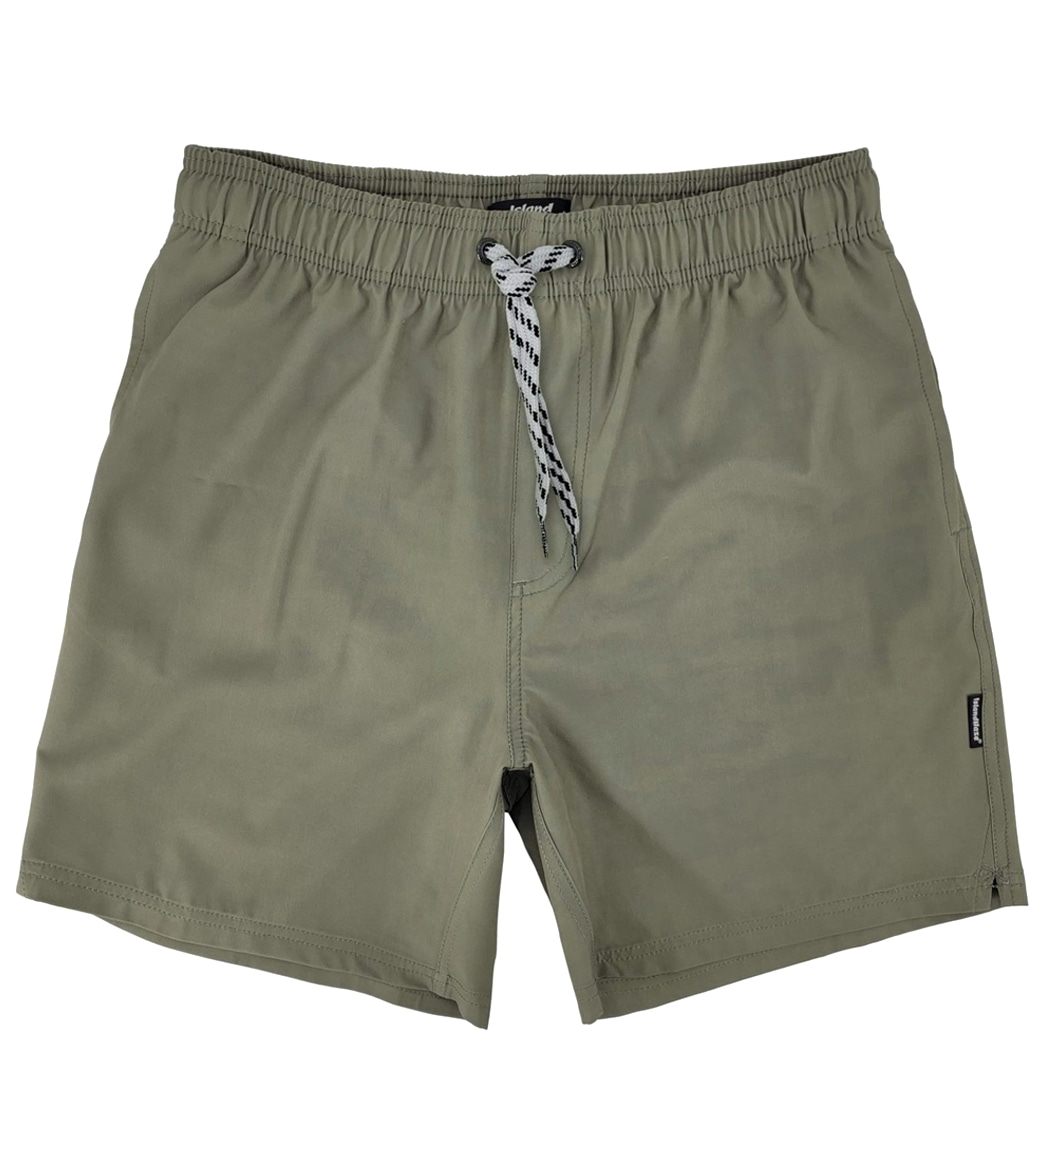 Island Haze Men's 16.5 Barbados Solid Volley Shorts - Olive Large Polyester - Swimoutlet.com